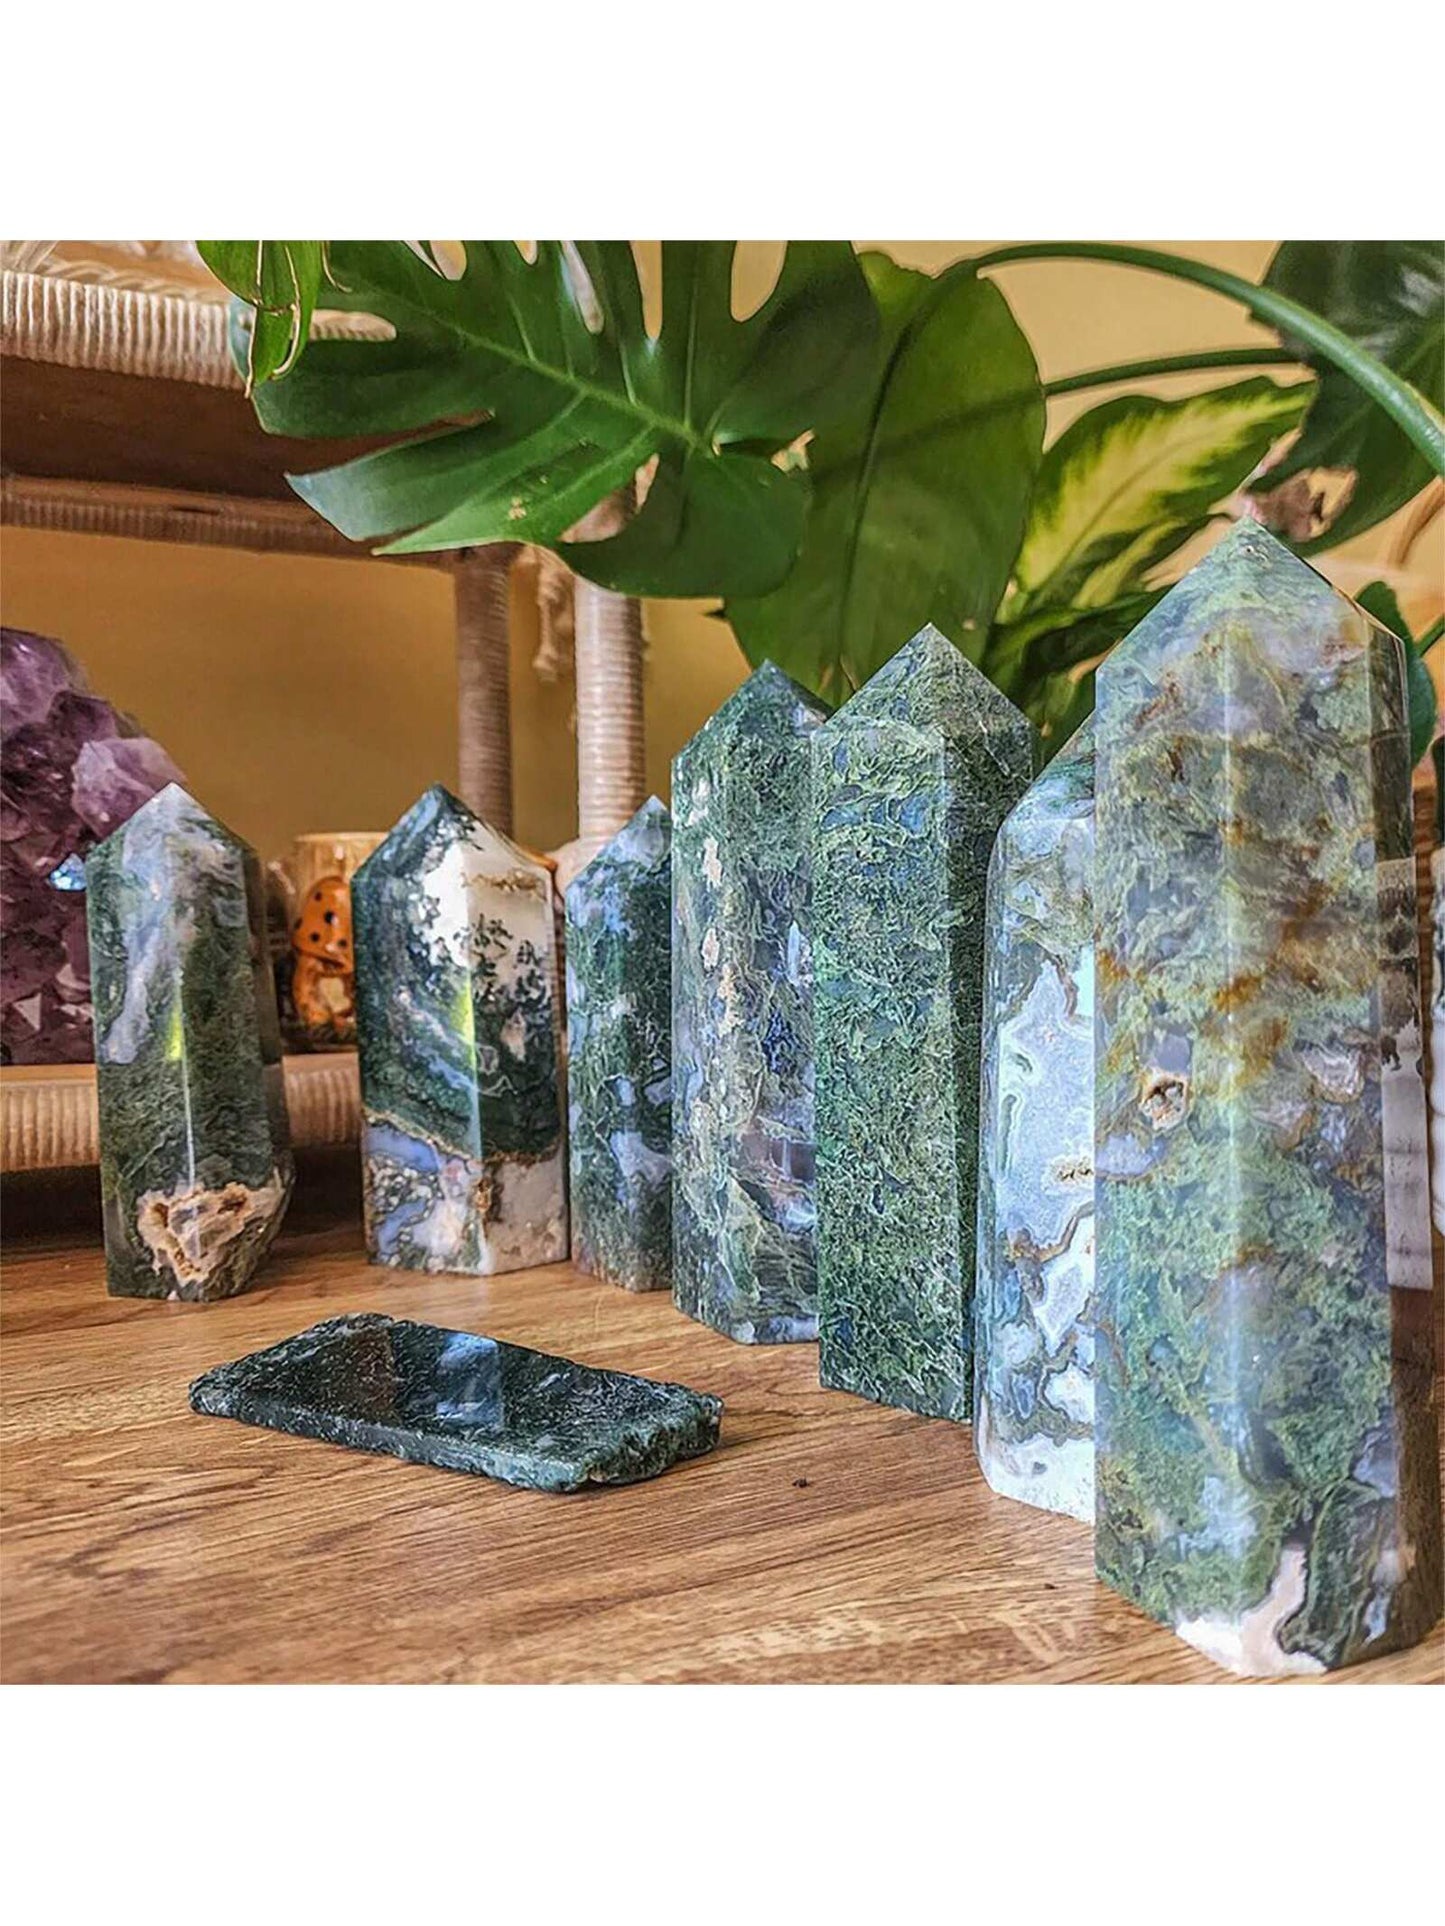 Natural Witch Healing Crystal Aqua Agate Onyx Single Point Healing Crystal Tower - 1 pc